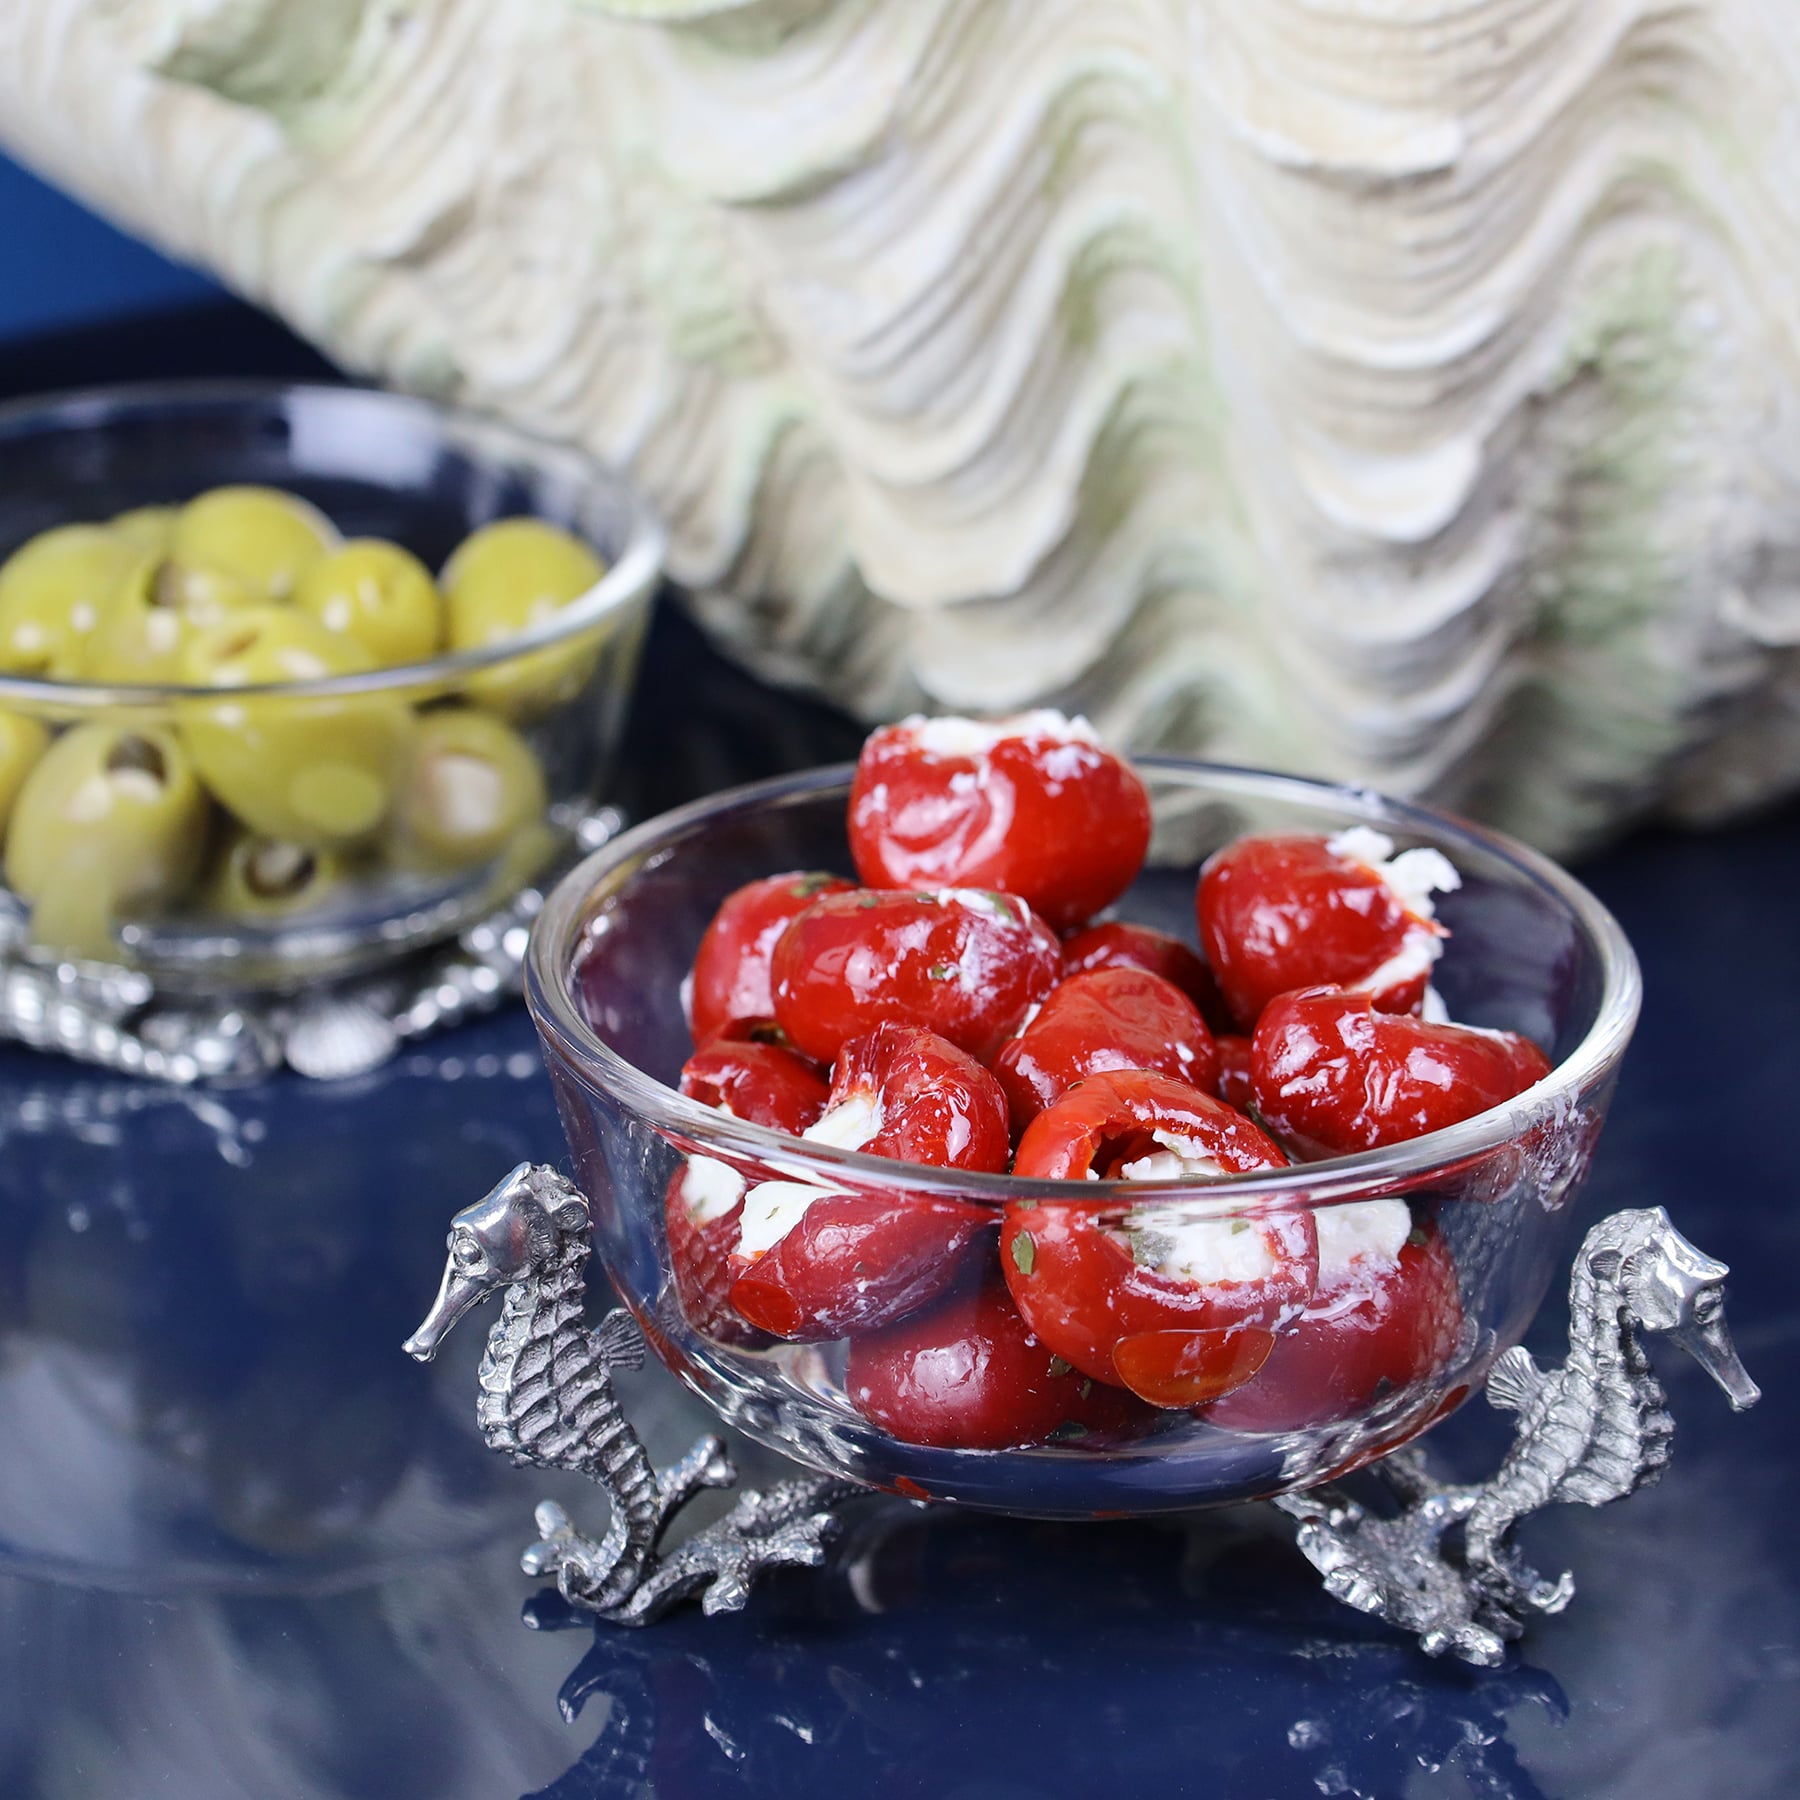 Pewter Seahorse Glass Bowl  containing olives next to a large shell